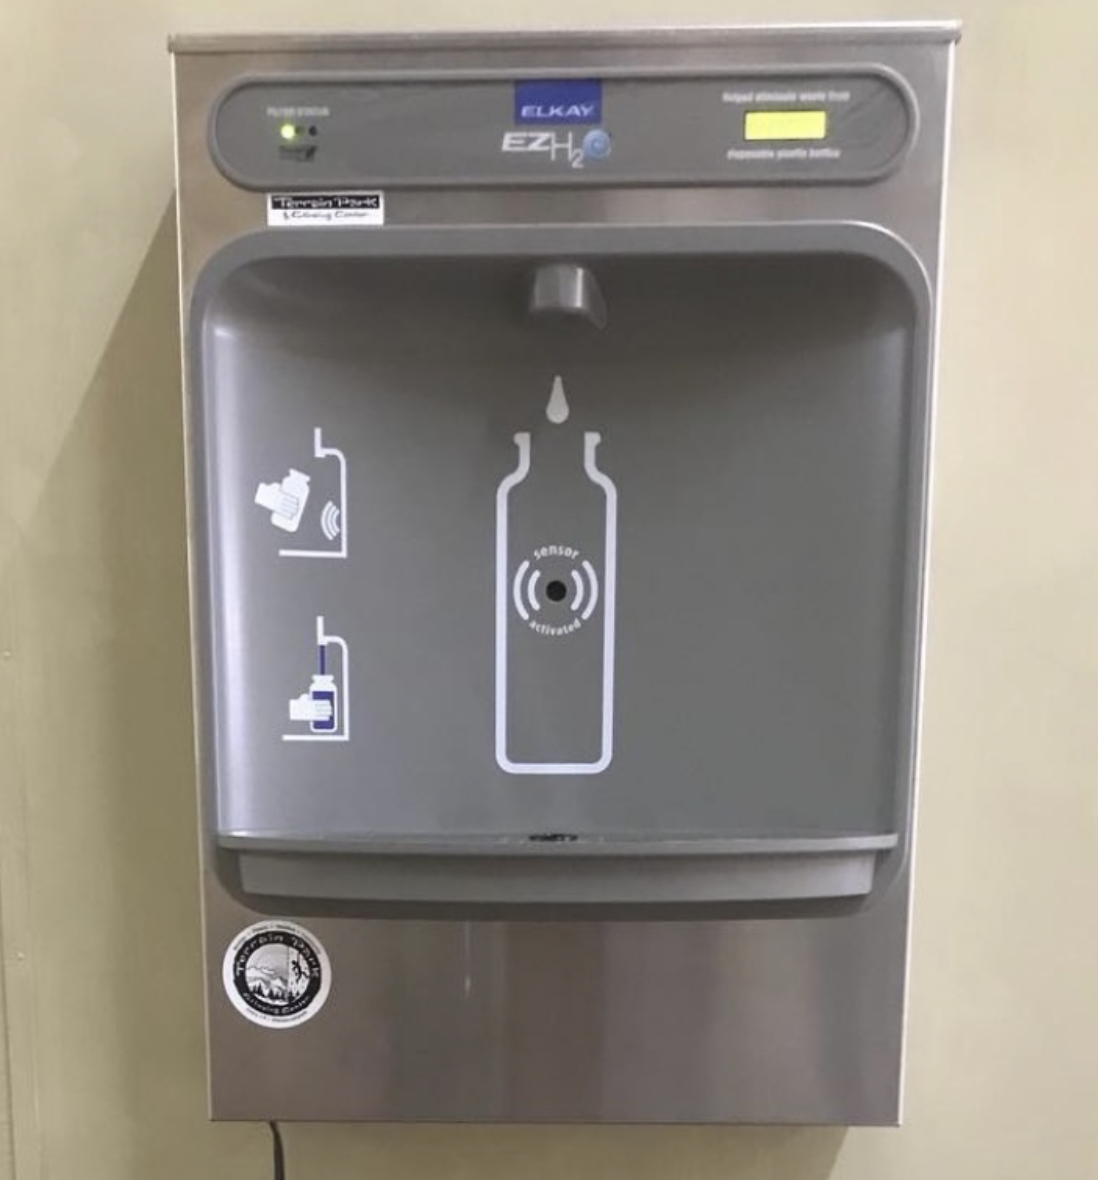 The water station initiative was proposed and passed in the spring of 2022 by the United Student Government (USG). (Courtesy of Instagram)